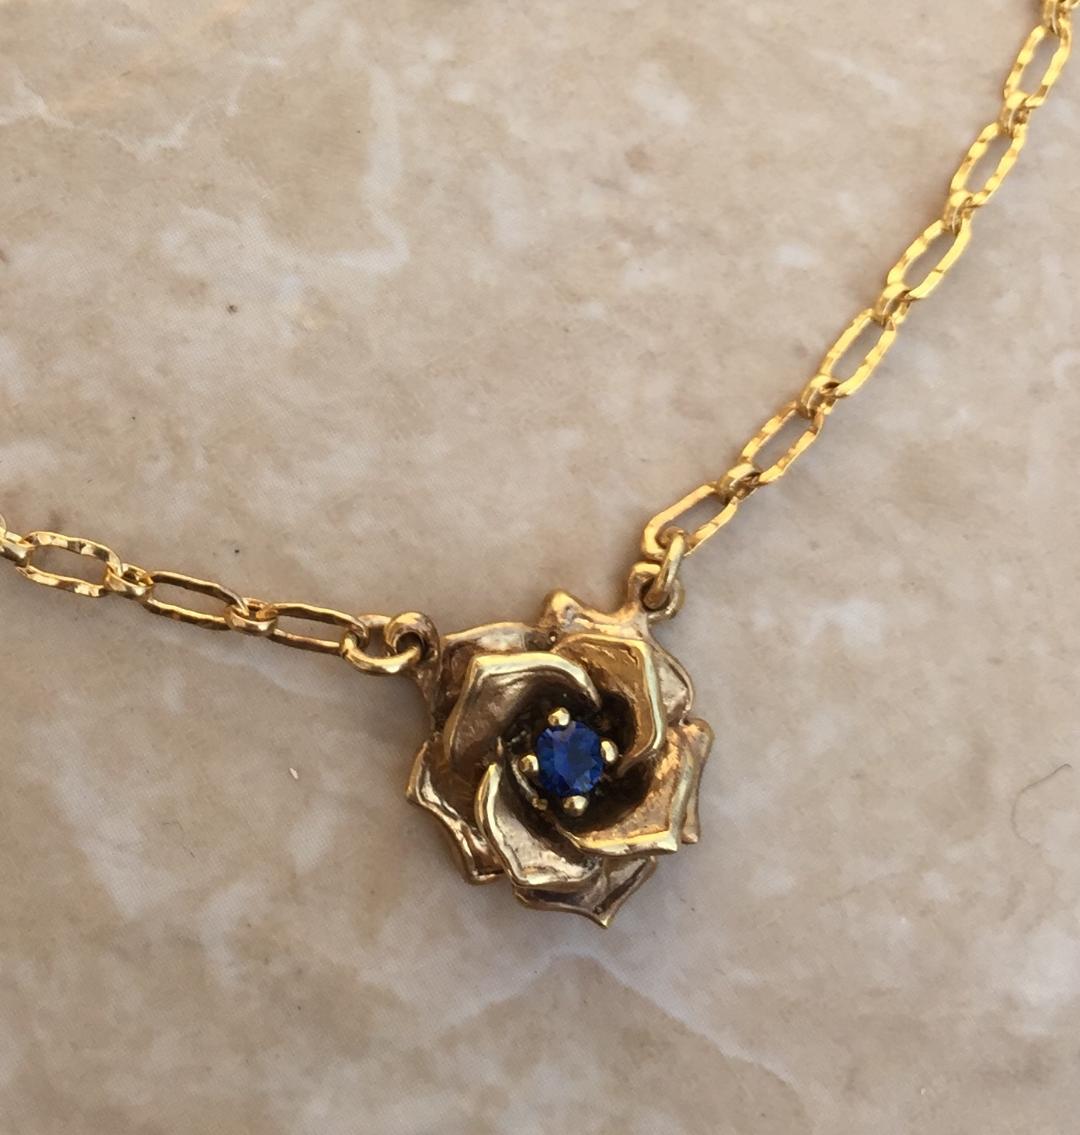 Necklace - Yellow-White Gold Rose with Sapphire